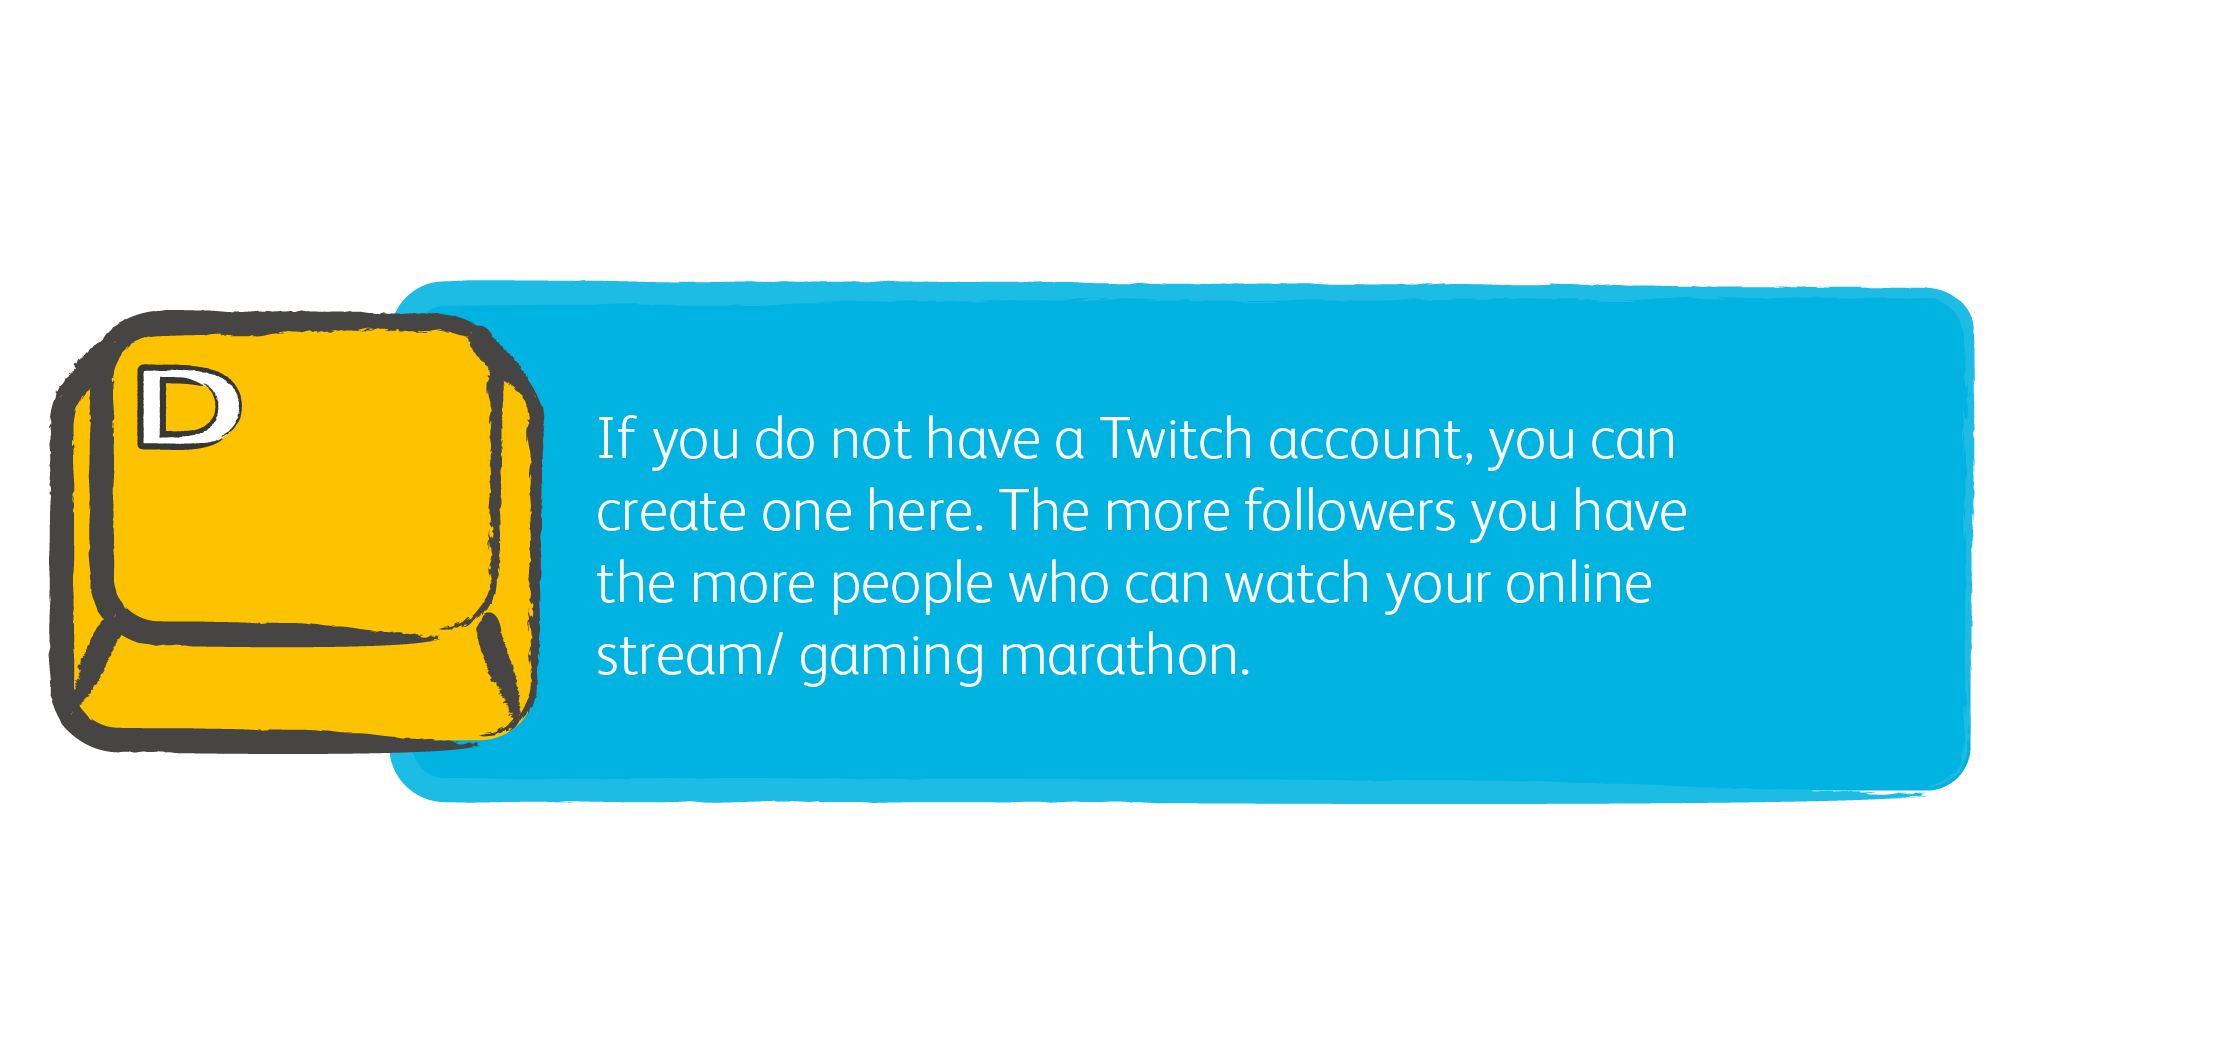 1. If you do not have a Twitch account, you can create one here. The more followers you have the more people who can watch your online stream/ gaming marathon